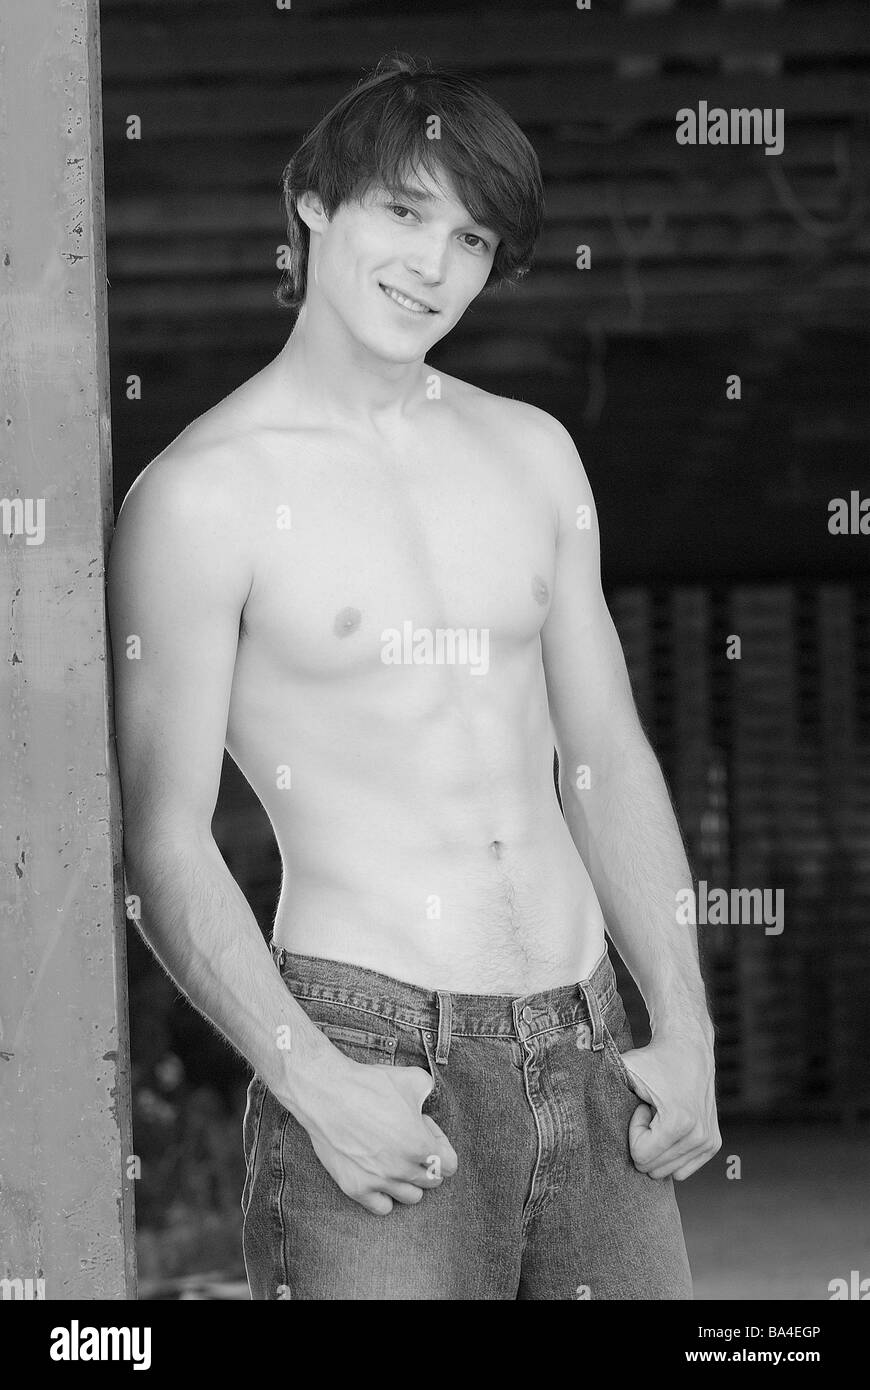 Man young upper bodies freely smiles detail s/w series people 20-30 years  brunette gaze camera jeans nonchalant cool casual Stock Photo - Alamy